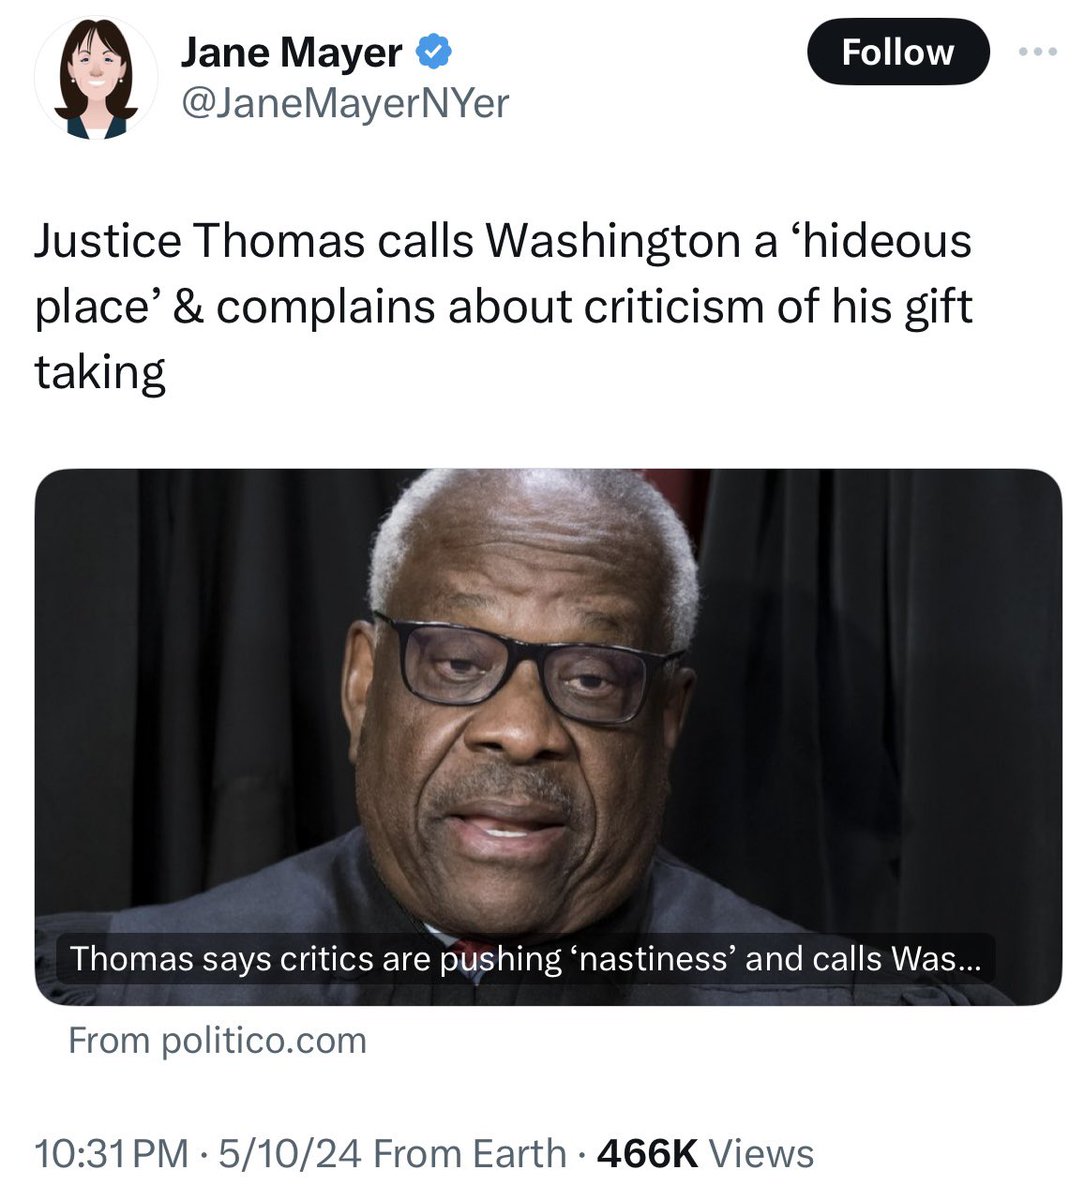 Clarence Thomas hears election cases while his wife conspired to overthrow democracy. He took free trips, gifts, tuition and even a free RV from a shadowy billionaire. Crooked clarence is corrupt as hell and should resign from the Supreme Court.